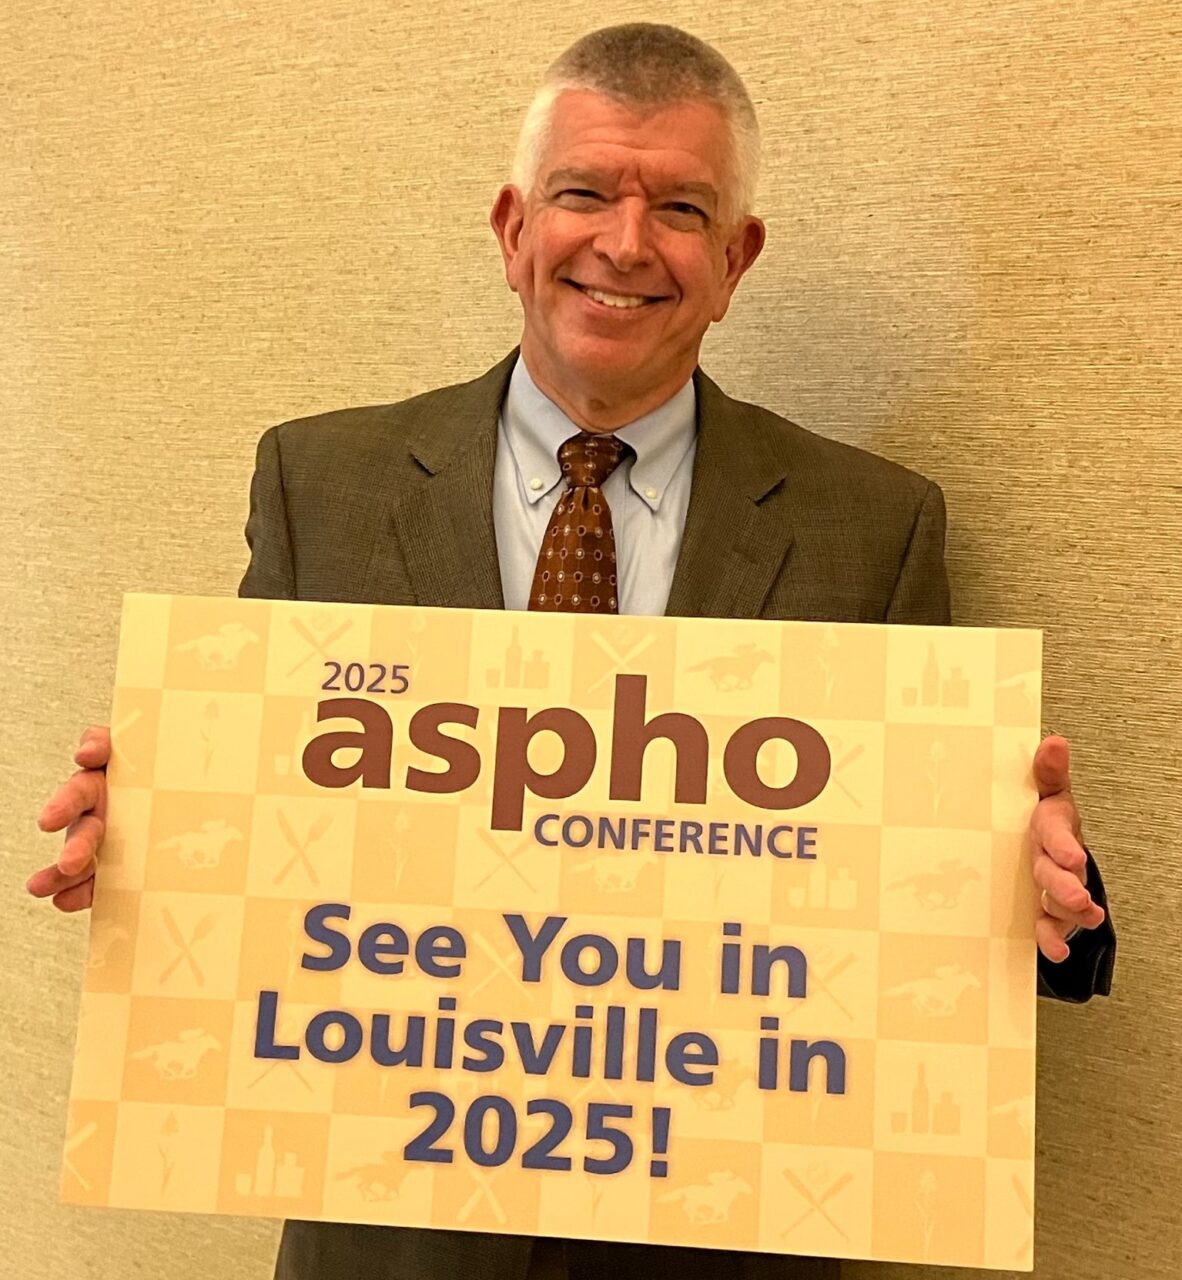 Jeffrey Hord: Looking forward to welcoming my friends and colleagues to my home state of Kentucky for next year‘s ASPHO Annual Conference